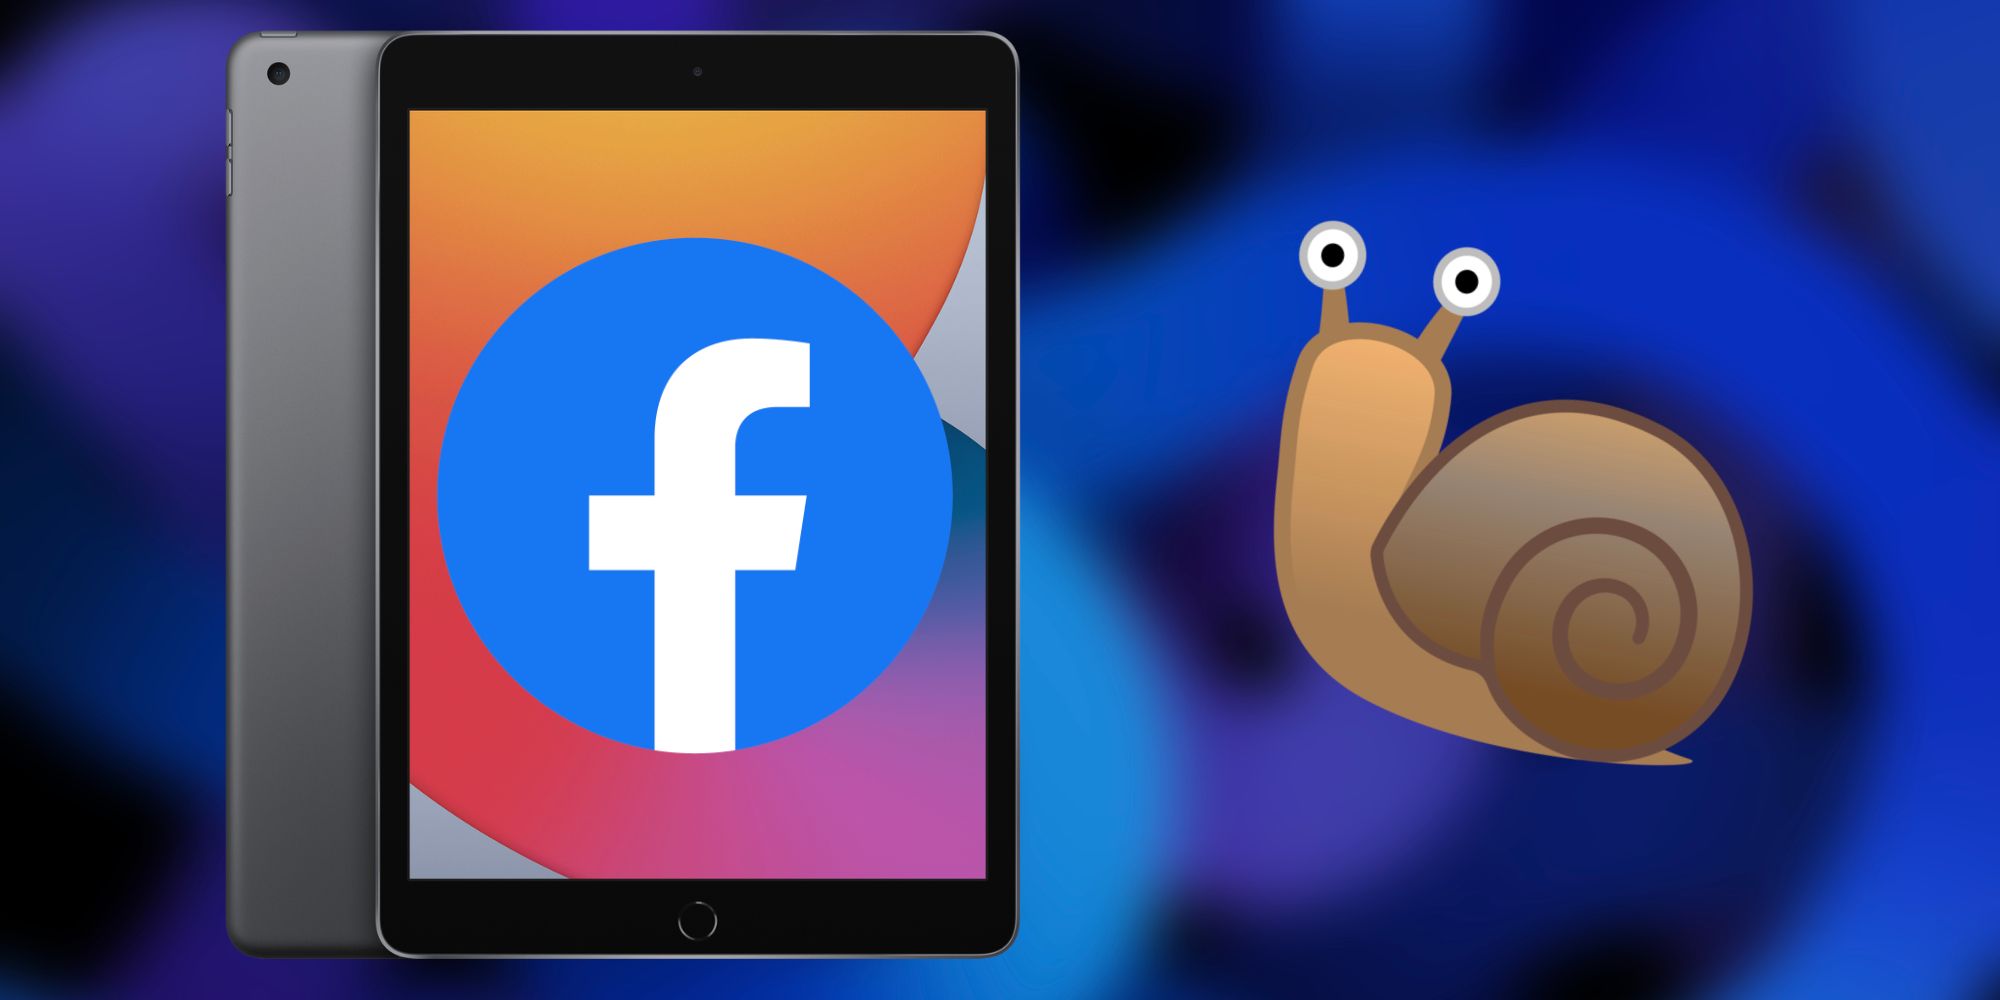 It's Now Clear Why The Facebook iPad App Took So Long To Arrive